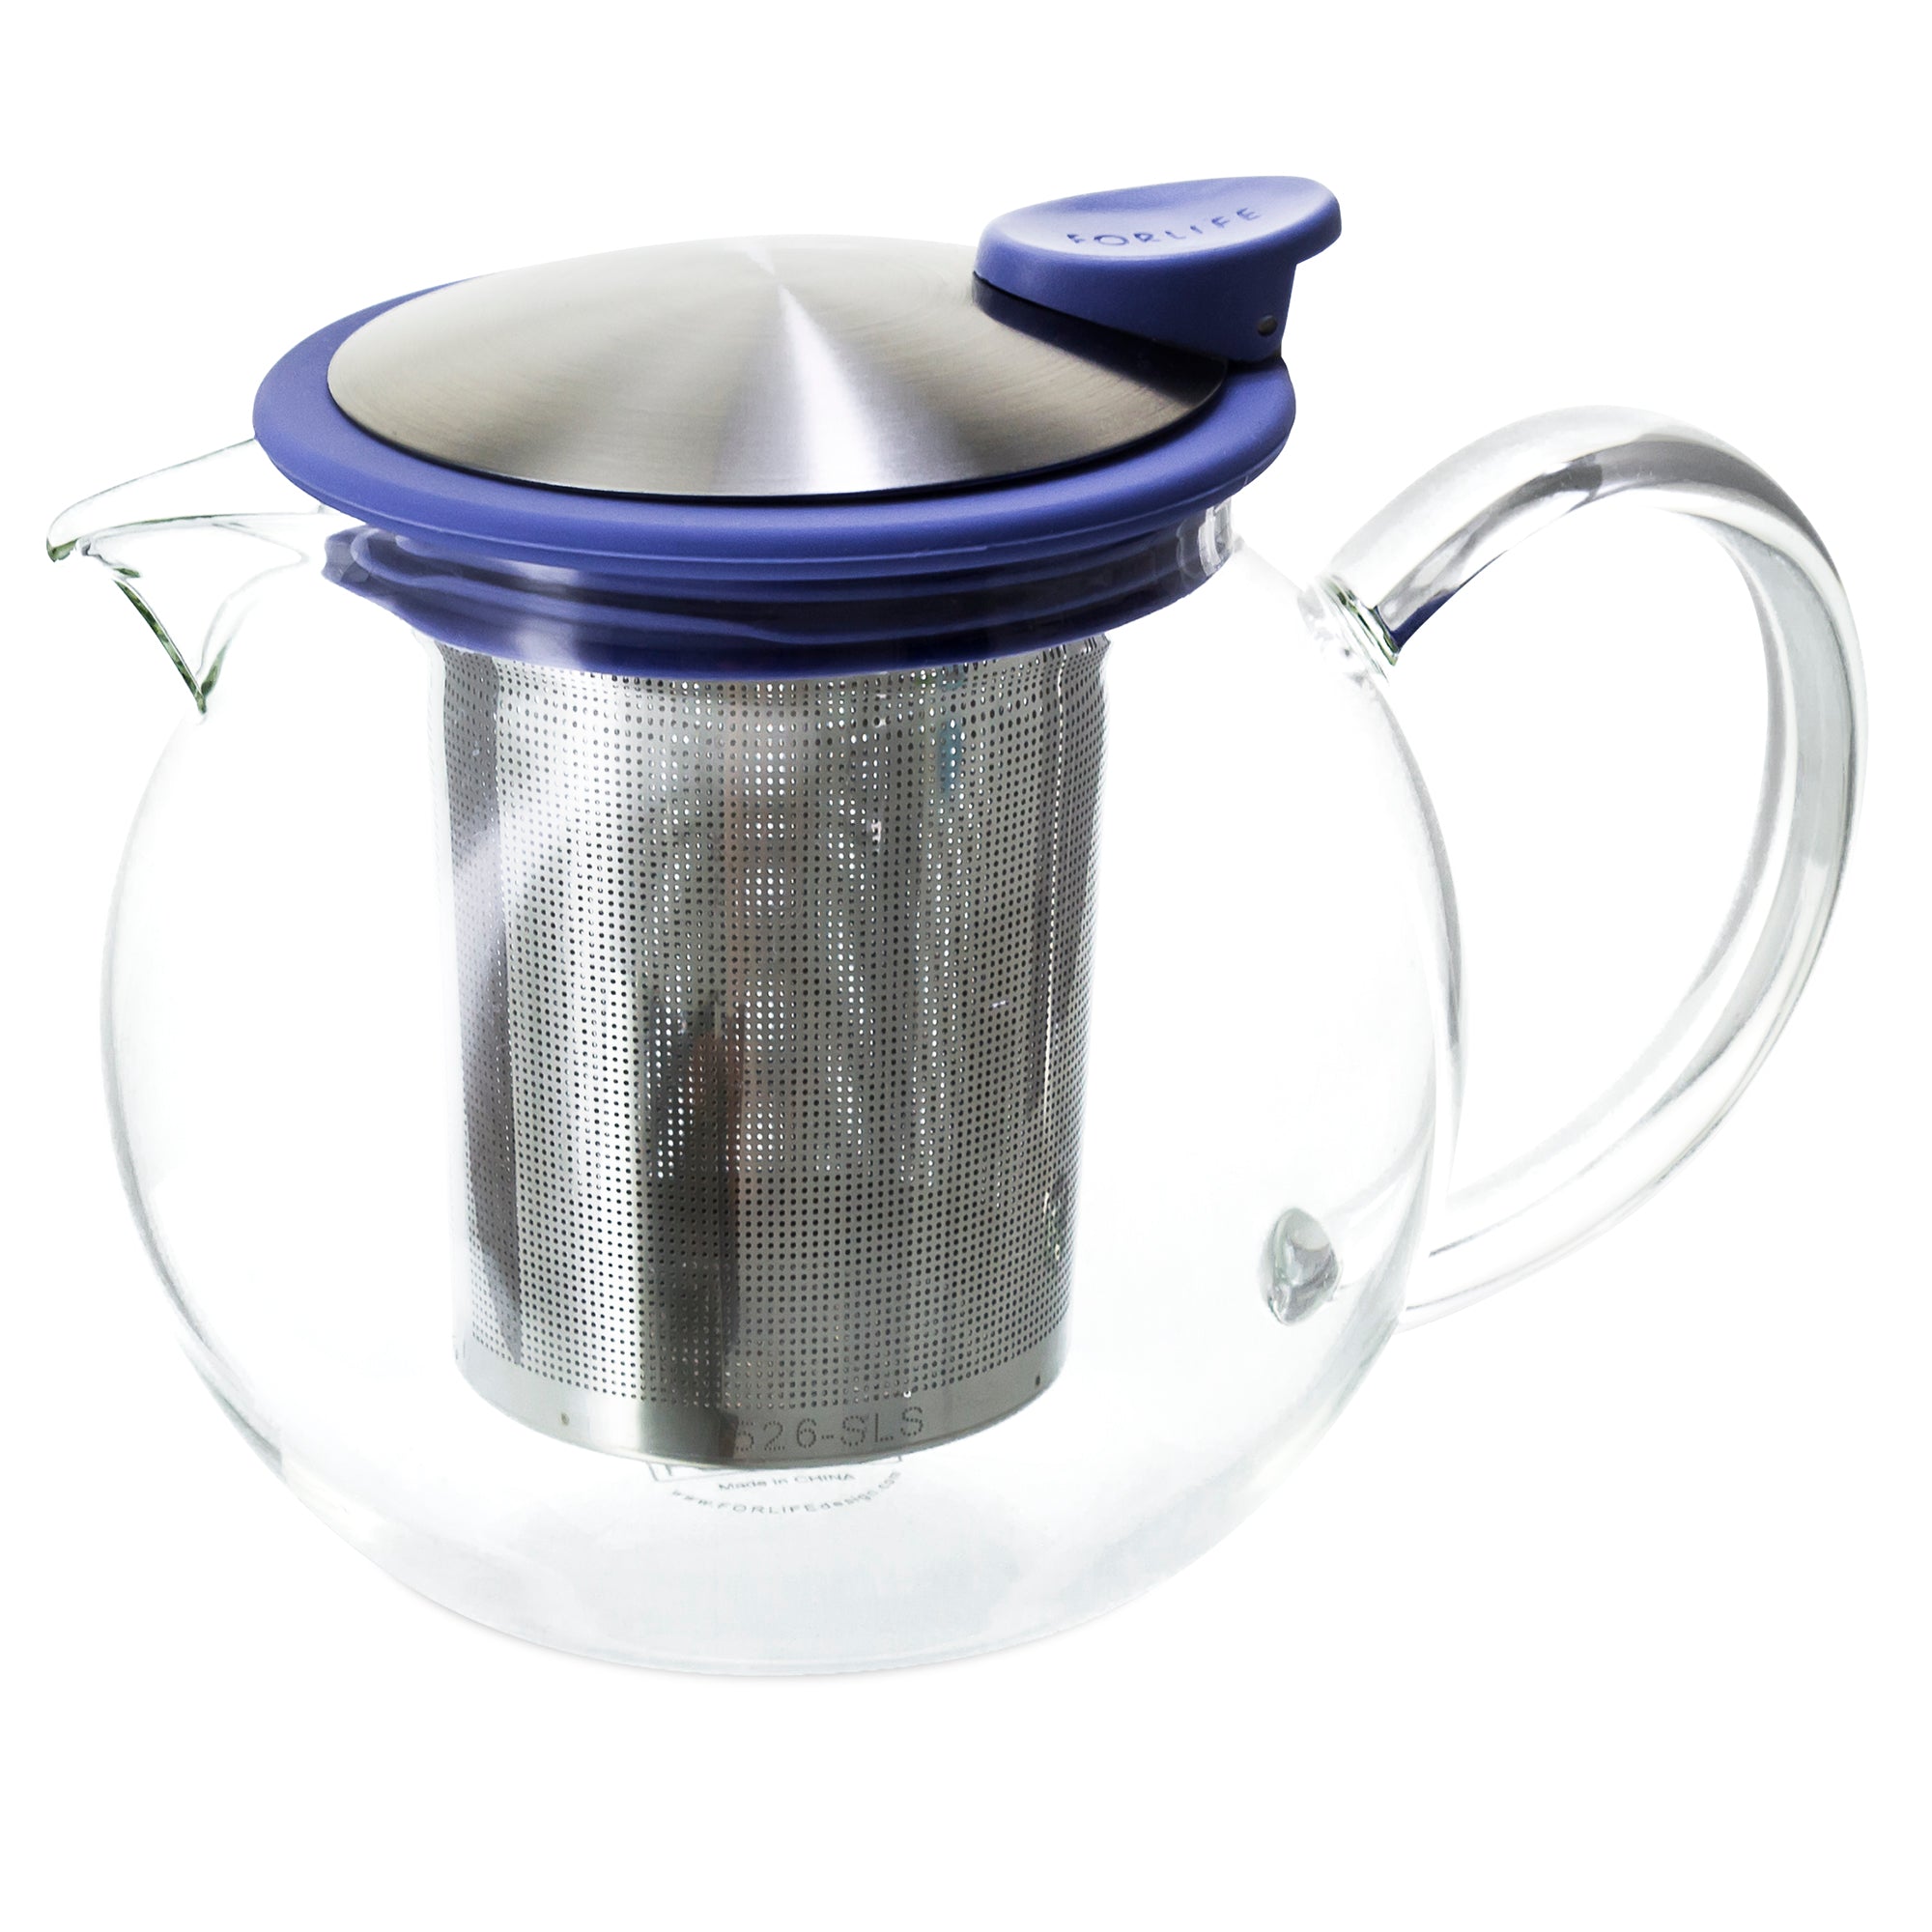 Bola Glass Teapot with Basket Infuser<br>25 oz.